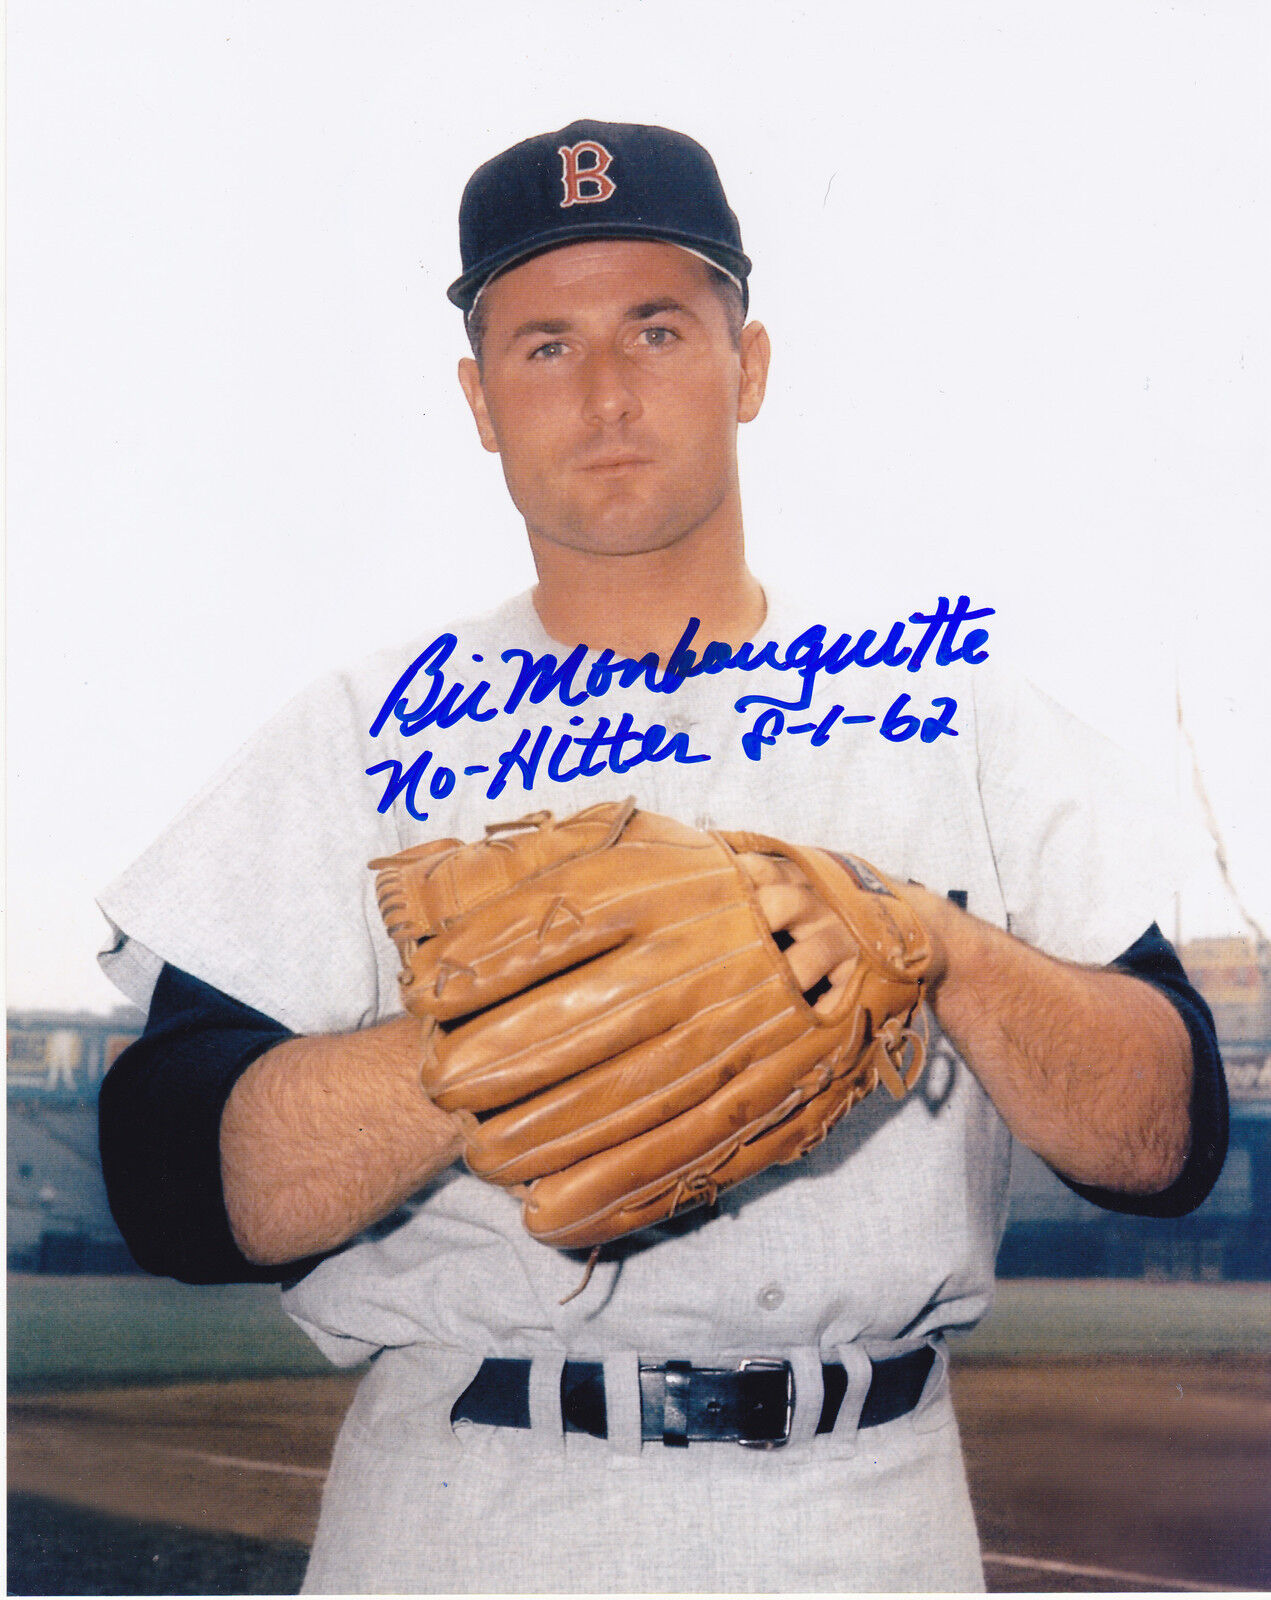 BILL MONBOUQUETTE BOSTON RED SOX NO-HITTER 8-1-62 ACTION SIGNED 8X10